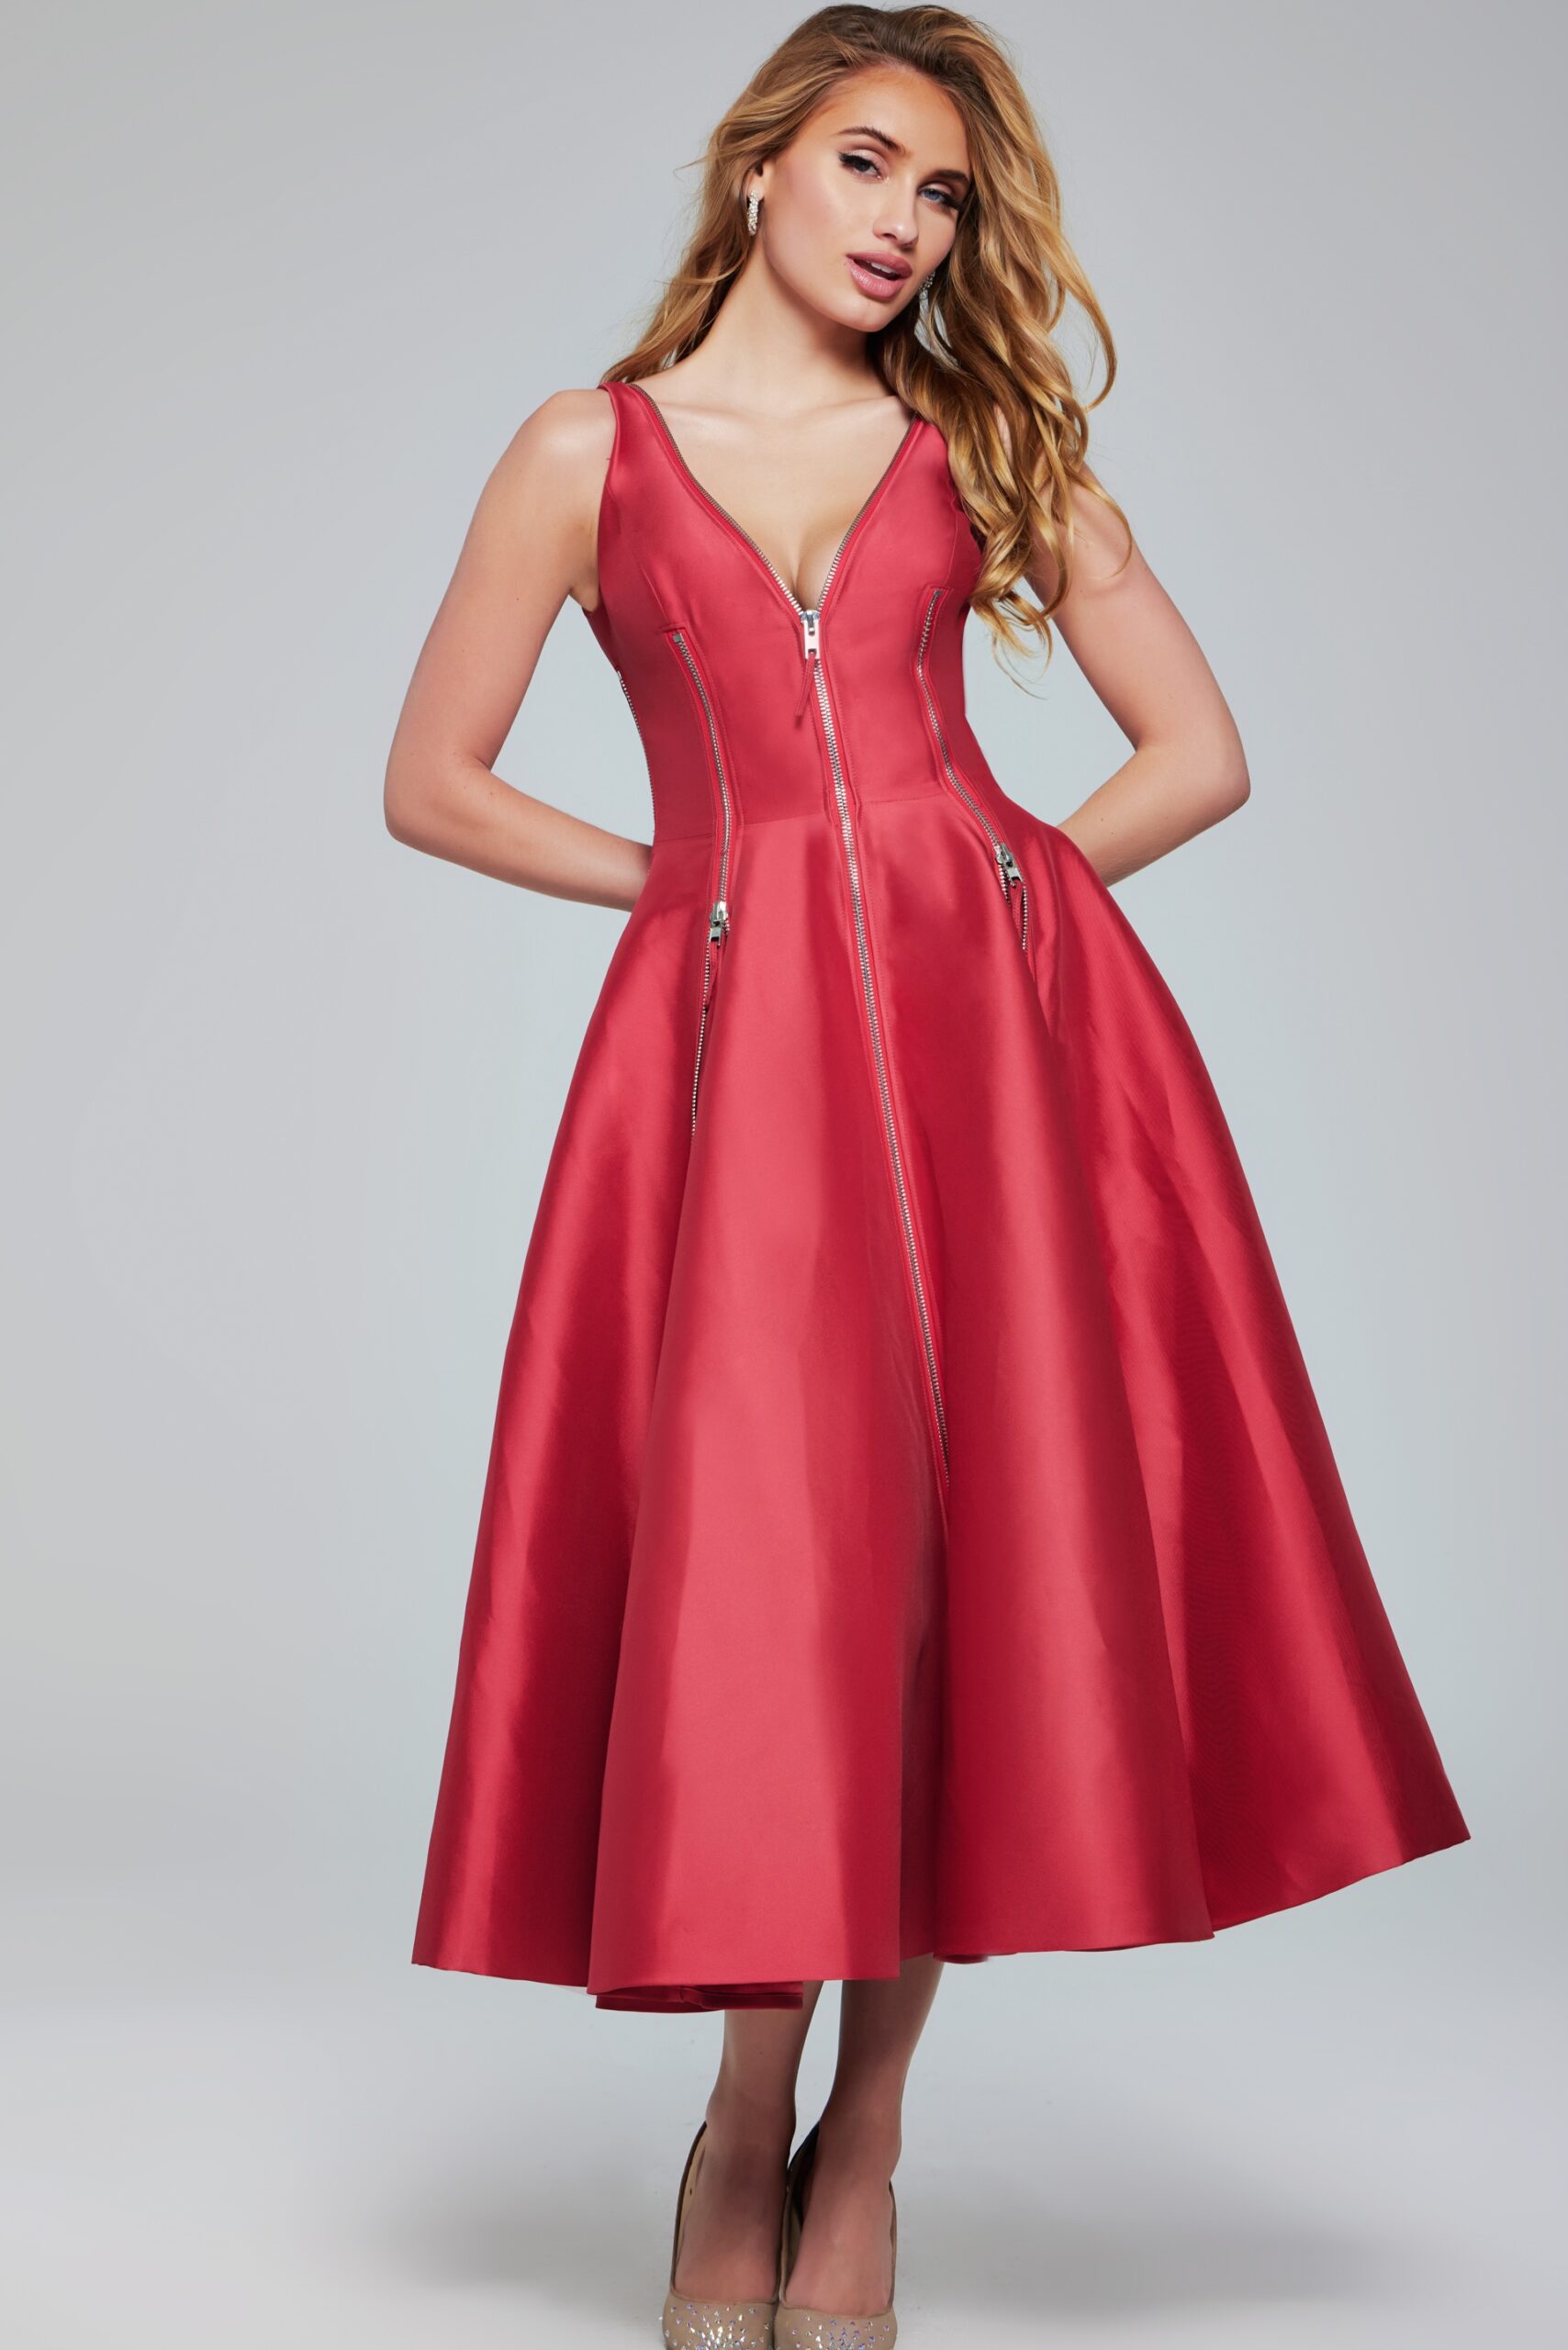 Zippered Fit & Flare Dress 37393